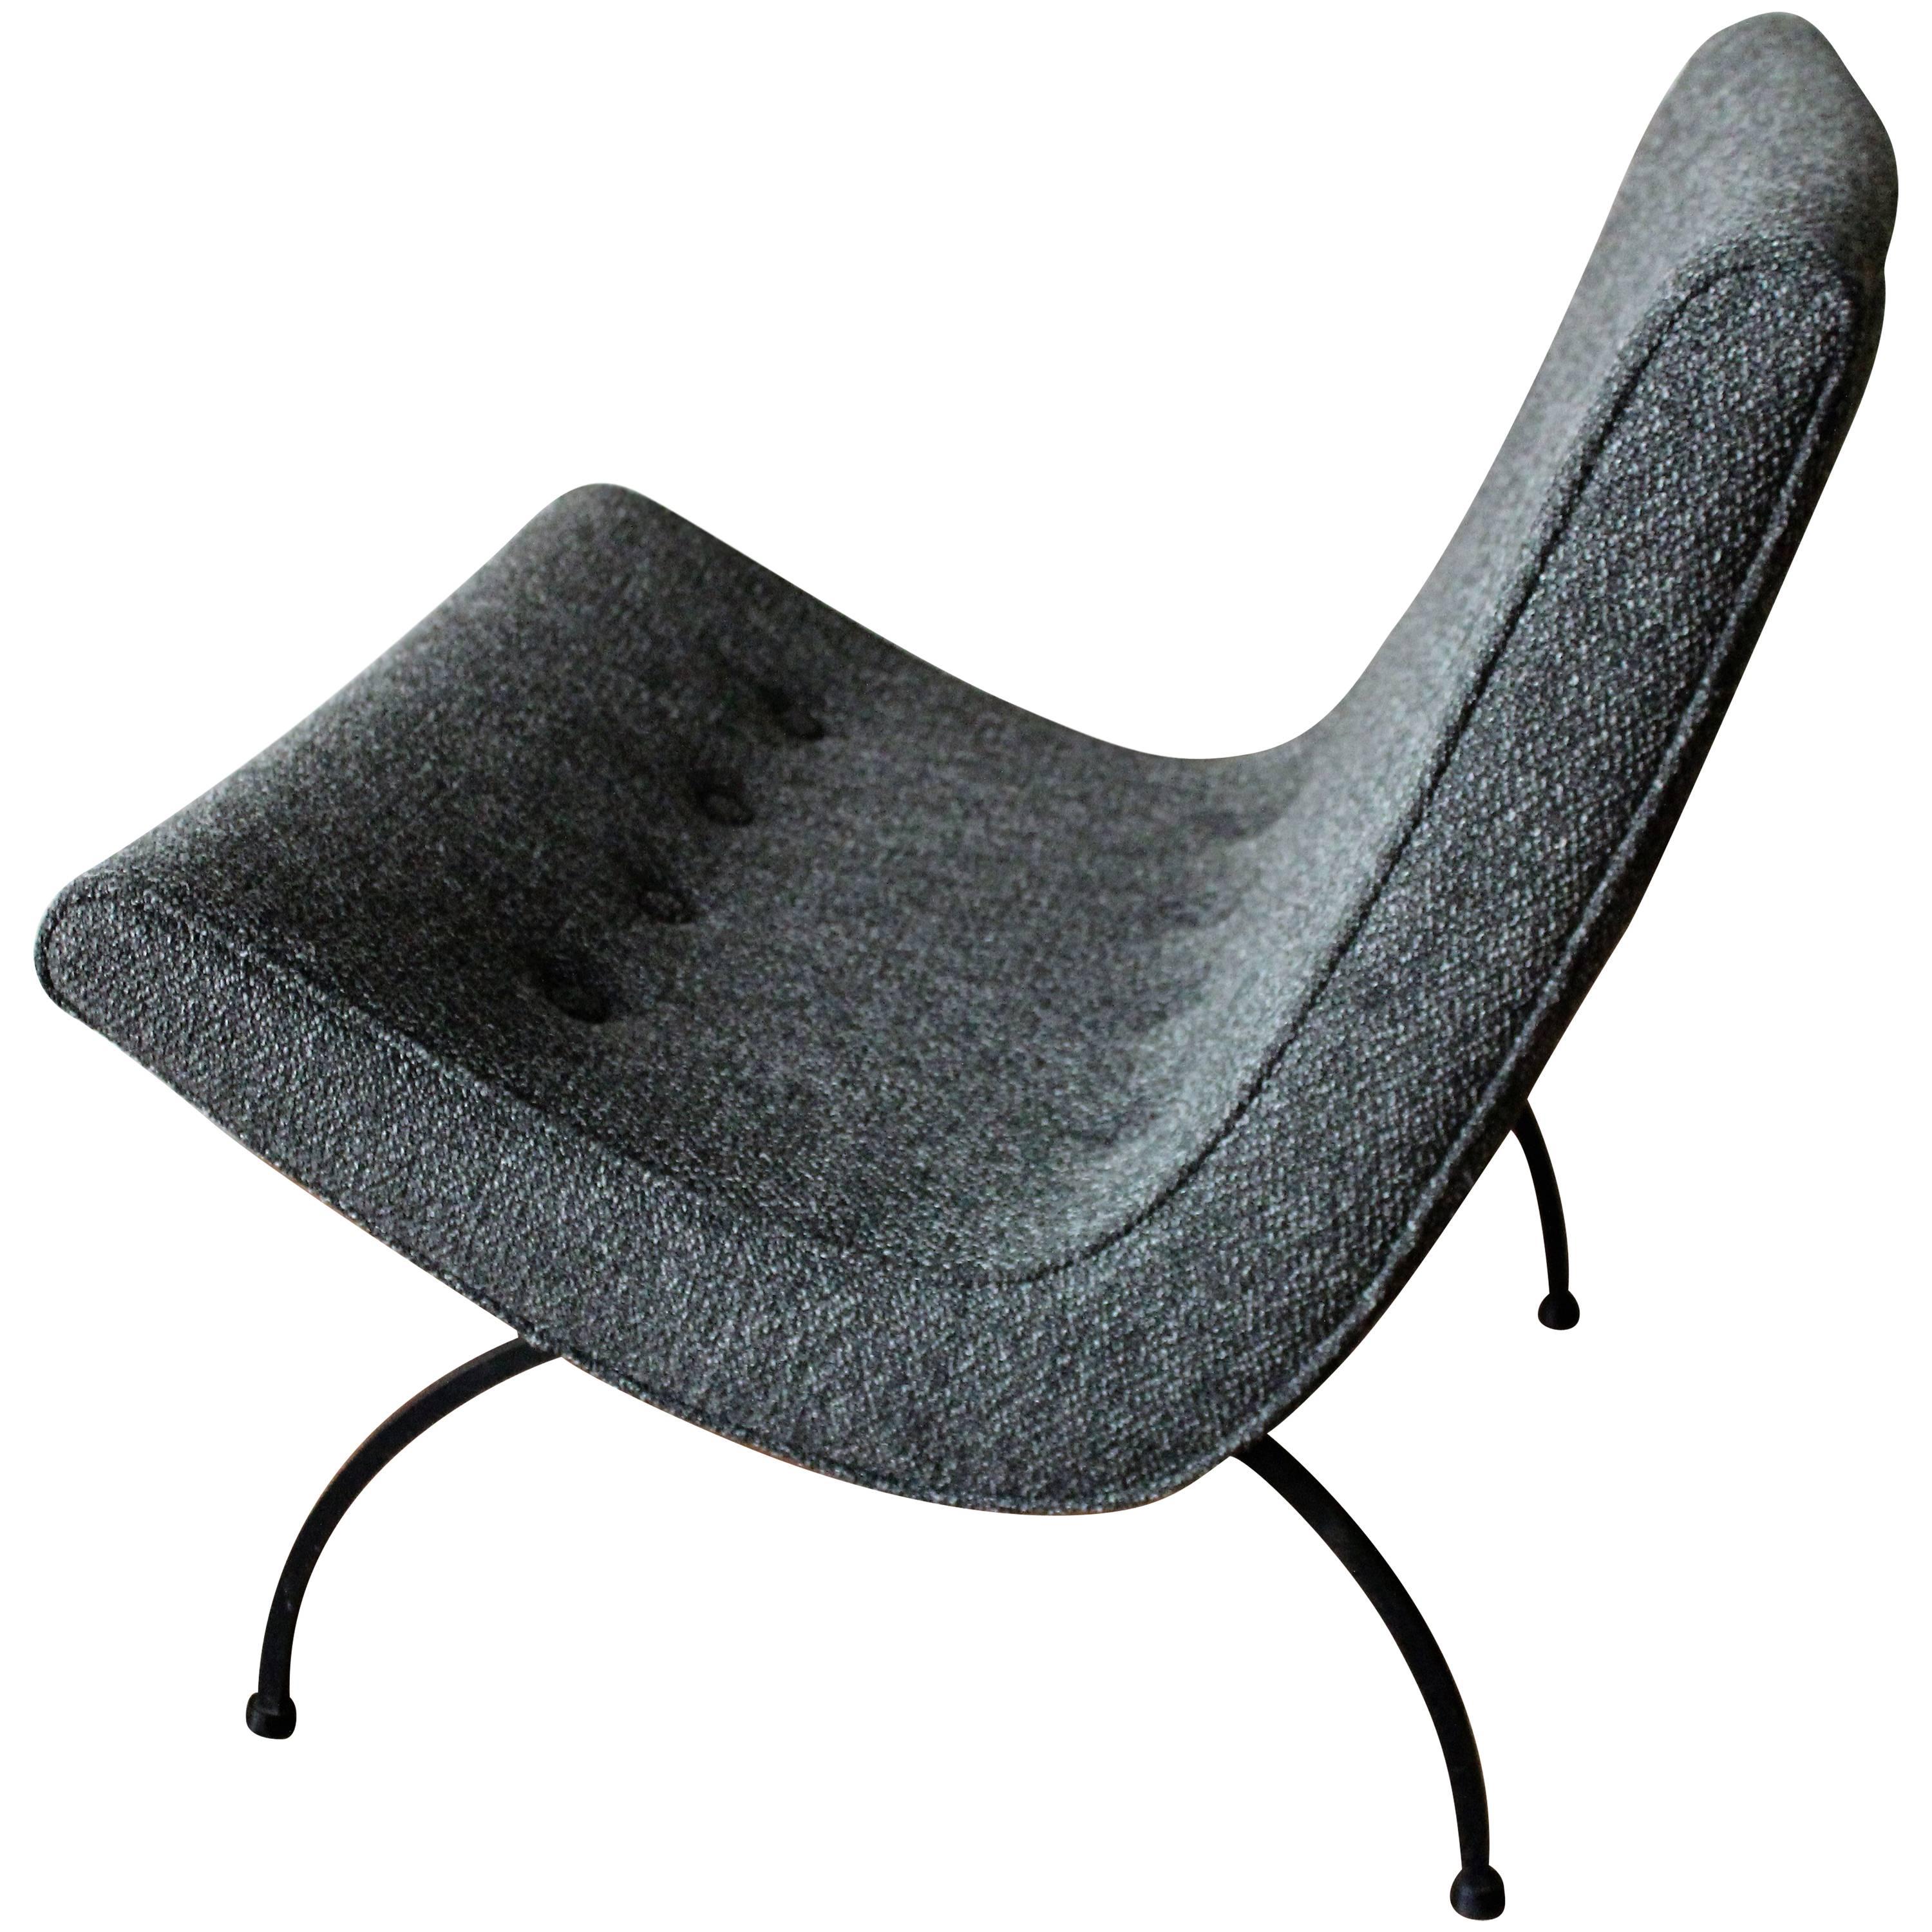 Milo Baughman Scoop chair manufactured by Thayer Coggin. Newly upholstered in a luscious salt and pepper bouclé fabric. This chair is the epitome of a quiet, yet powerful design.